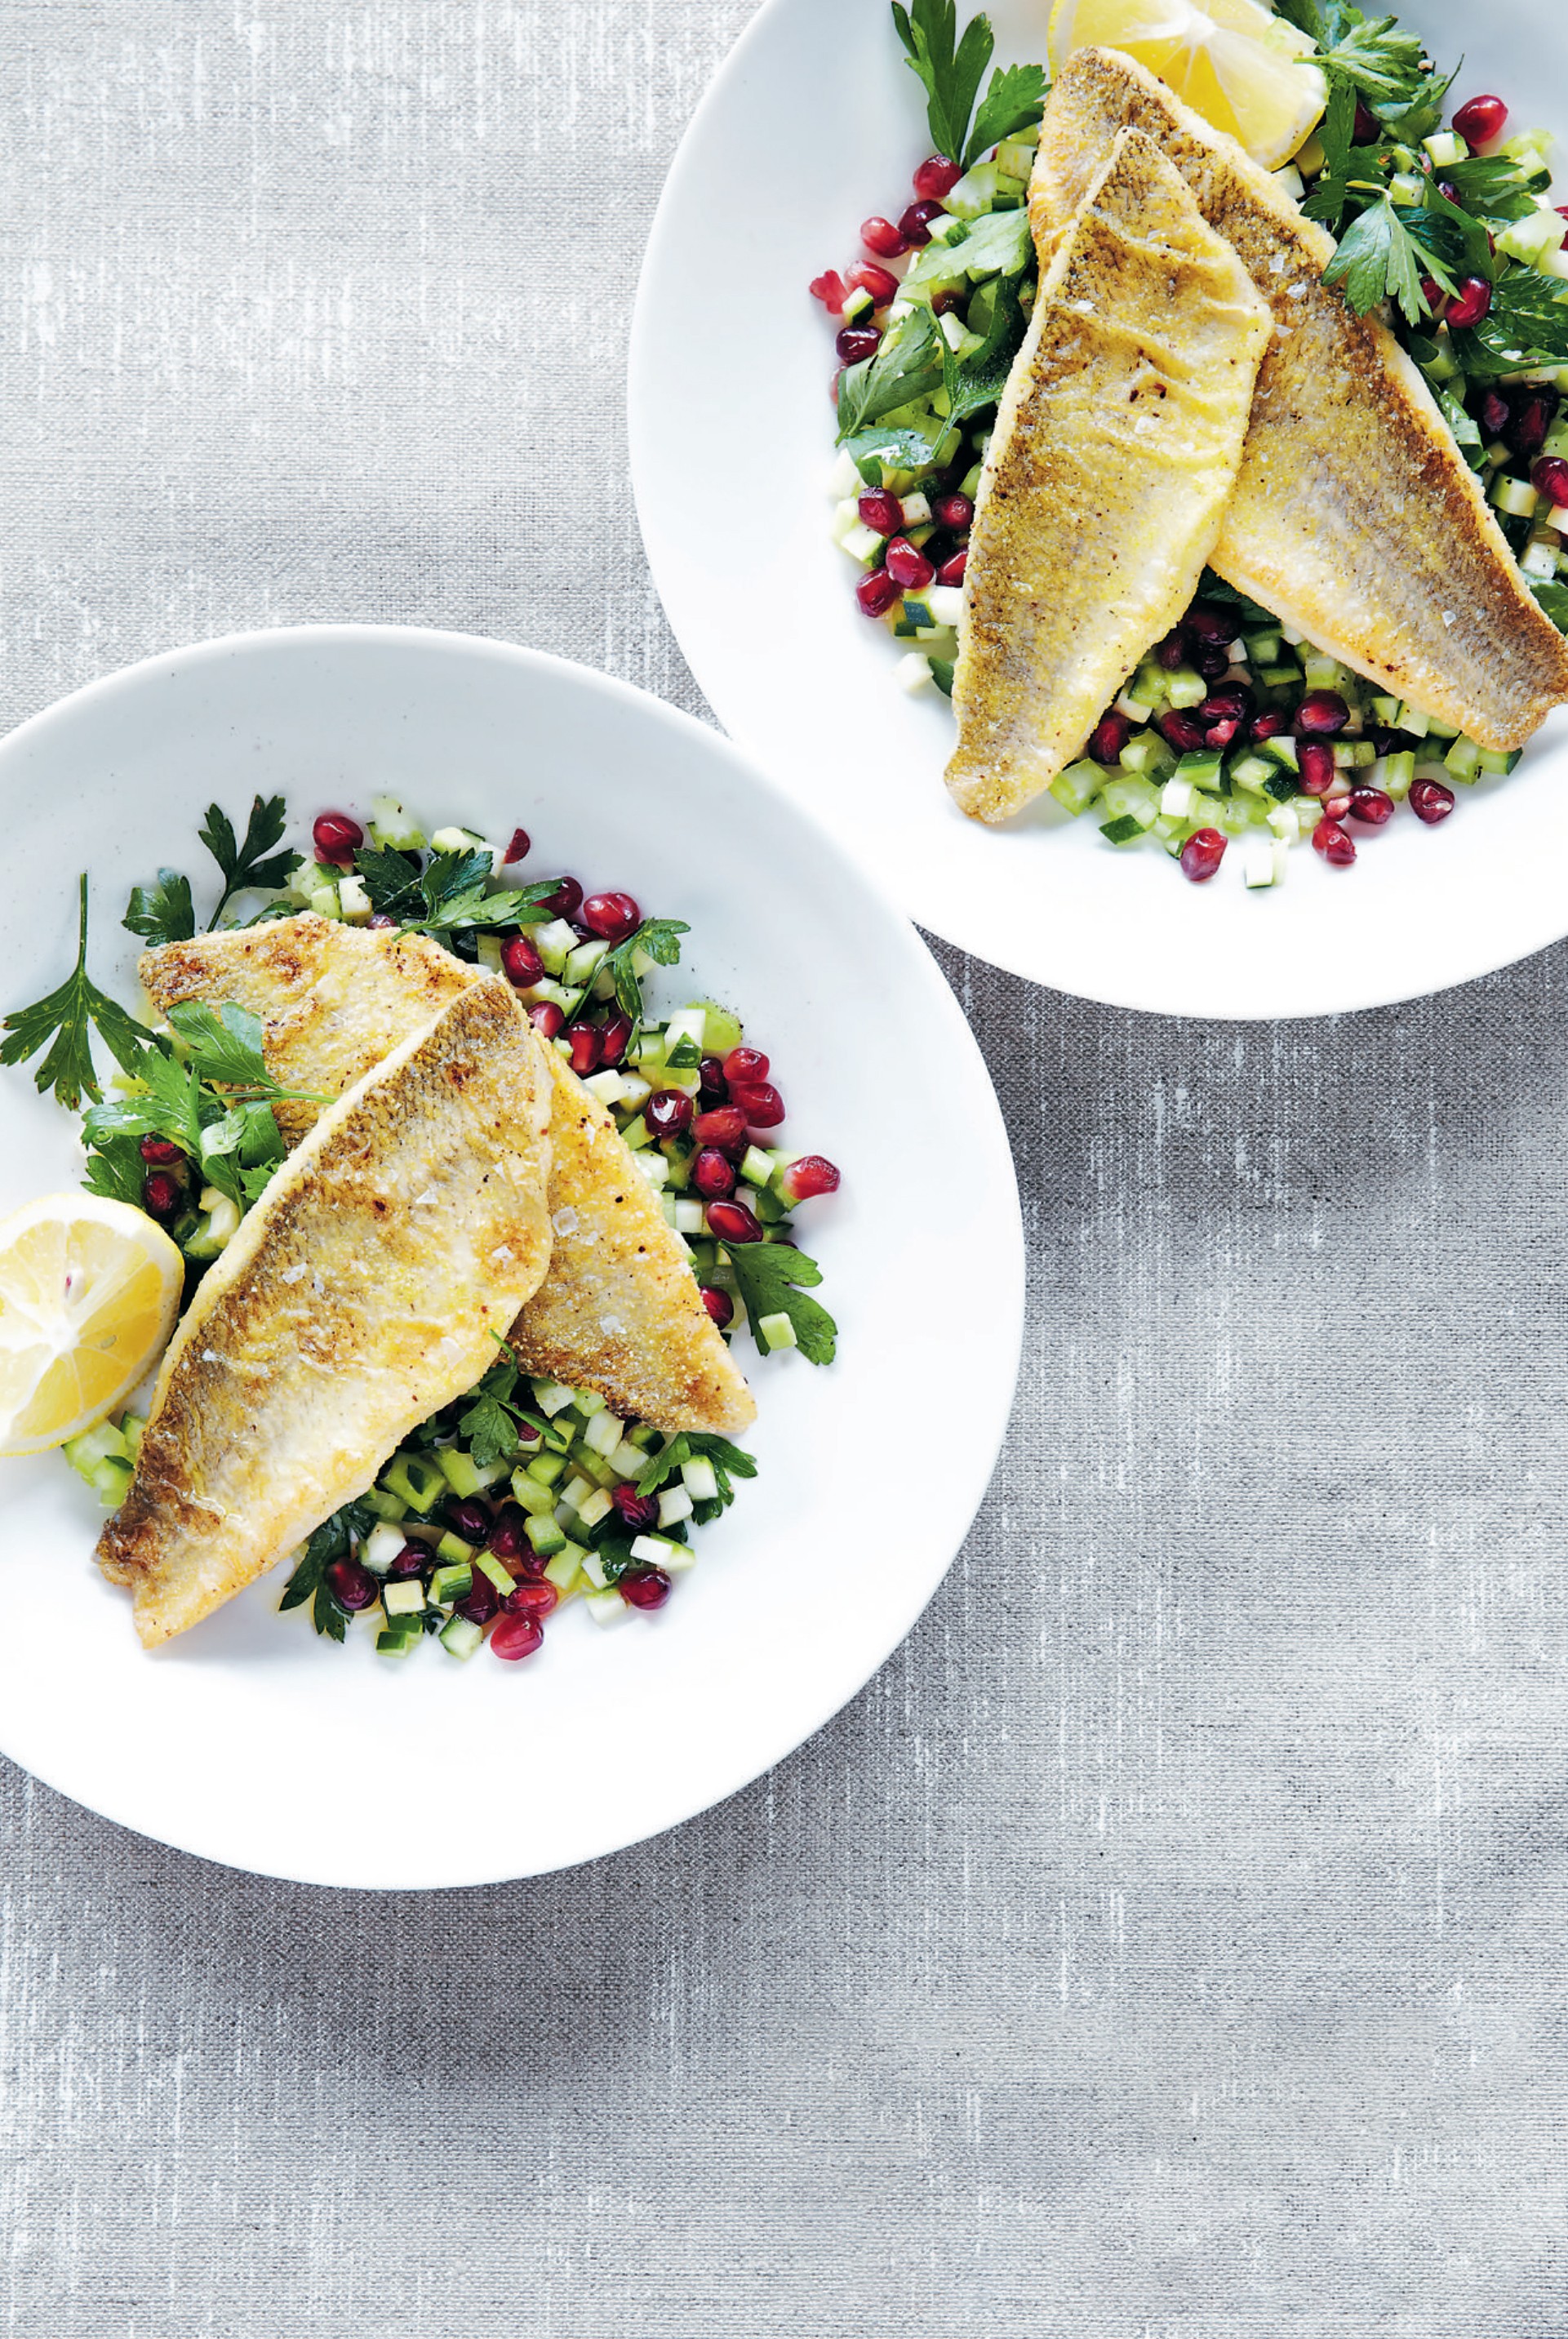 Pan-fried whiting with pomegranate salad from A Simple Table by Michele ...